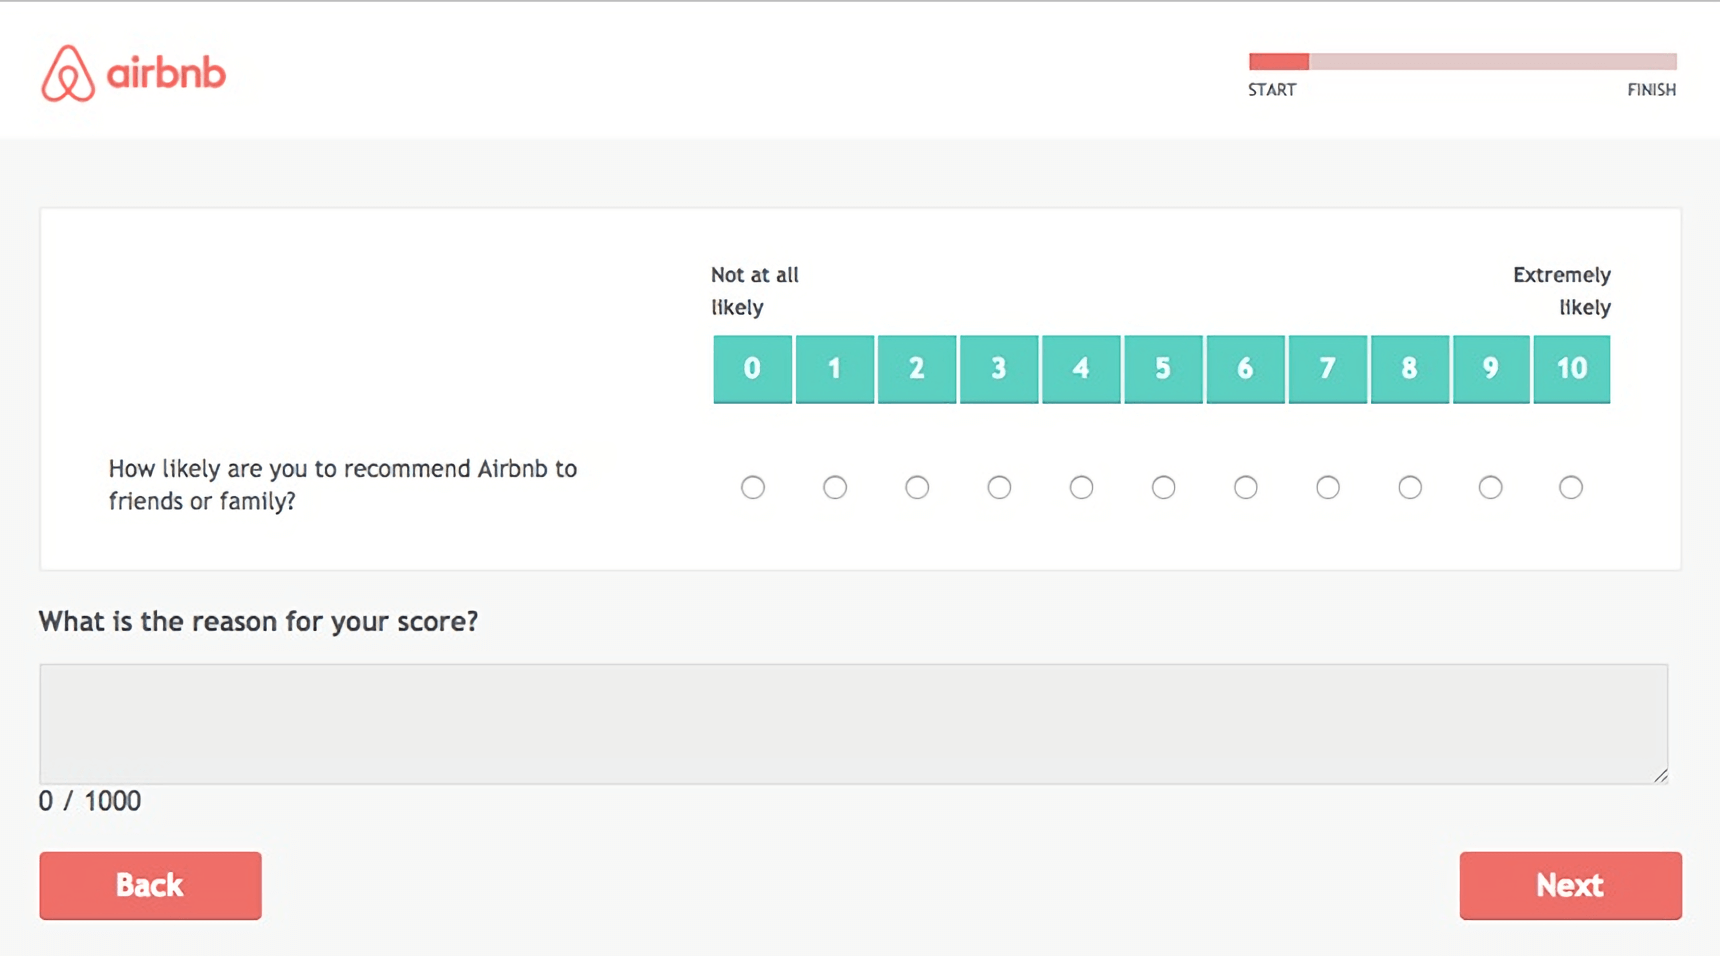 Airbnb NPS Survey Example